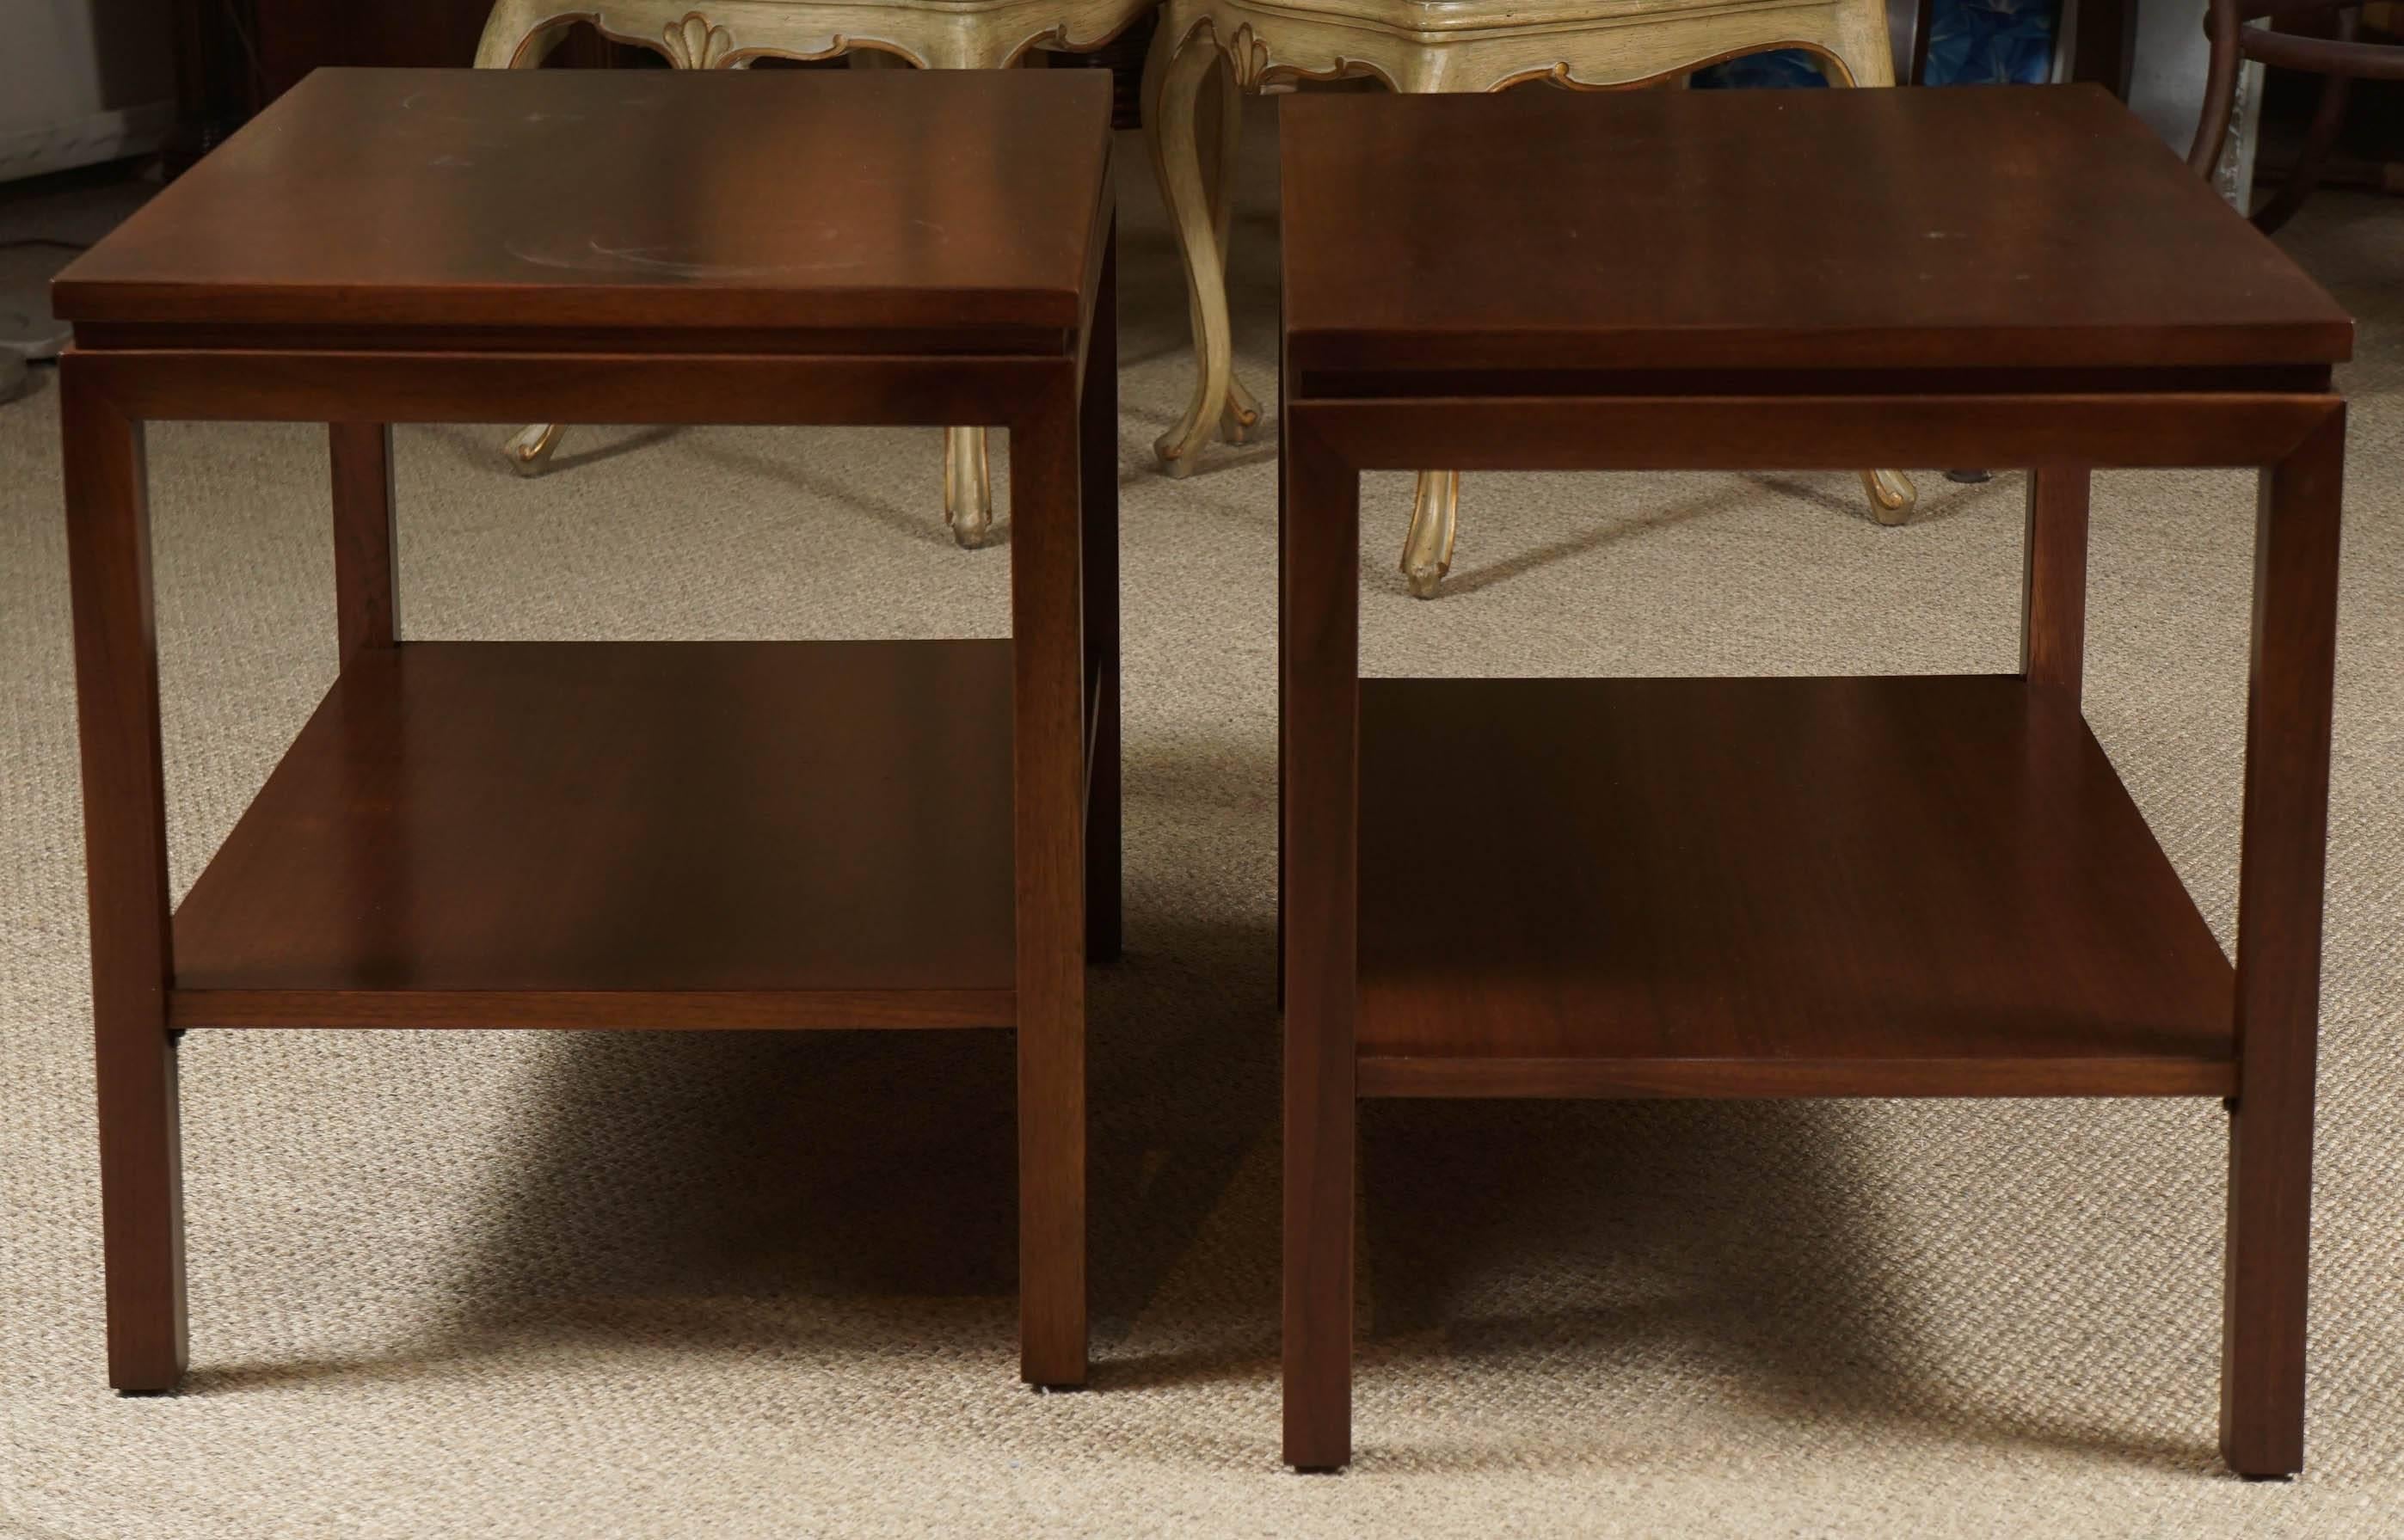 Here is a beautiful pair of modern walnut end tables with shelves.
New refurbished, the tables are in excellent condition.